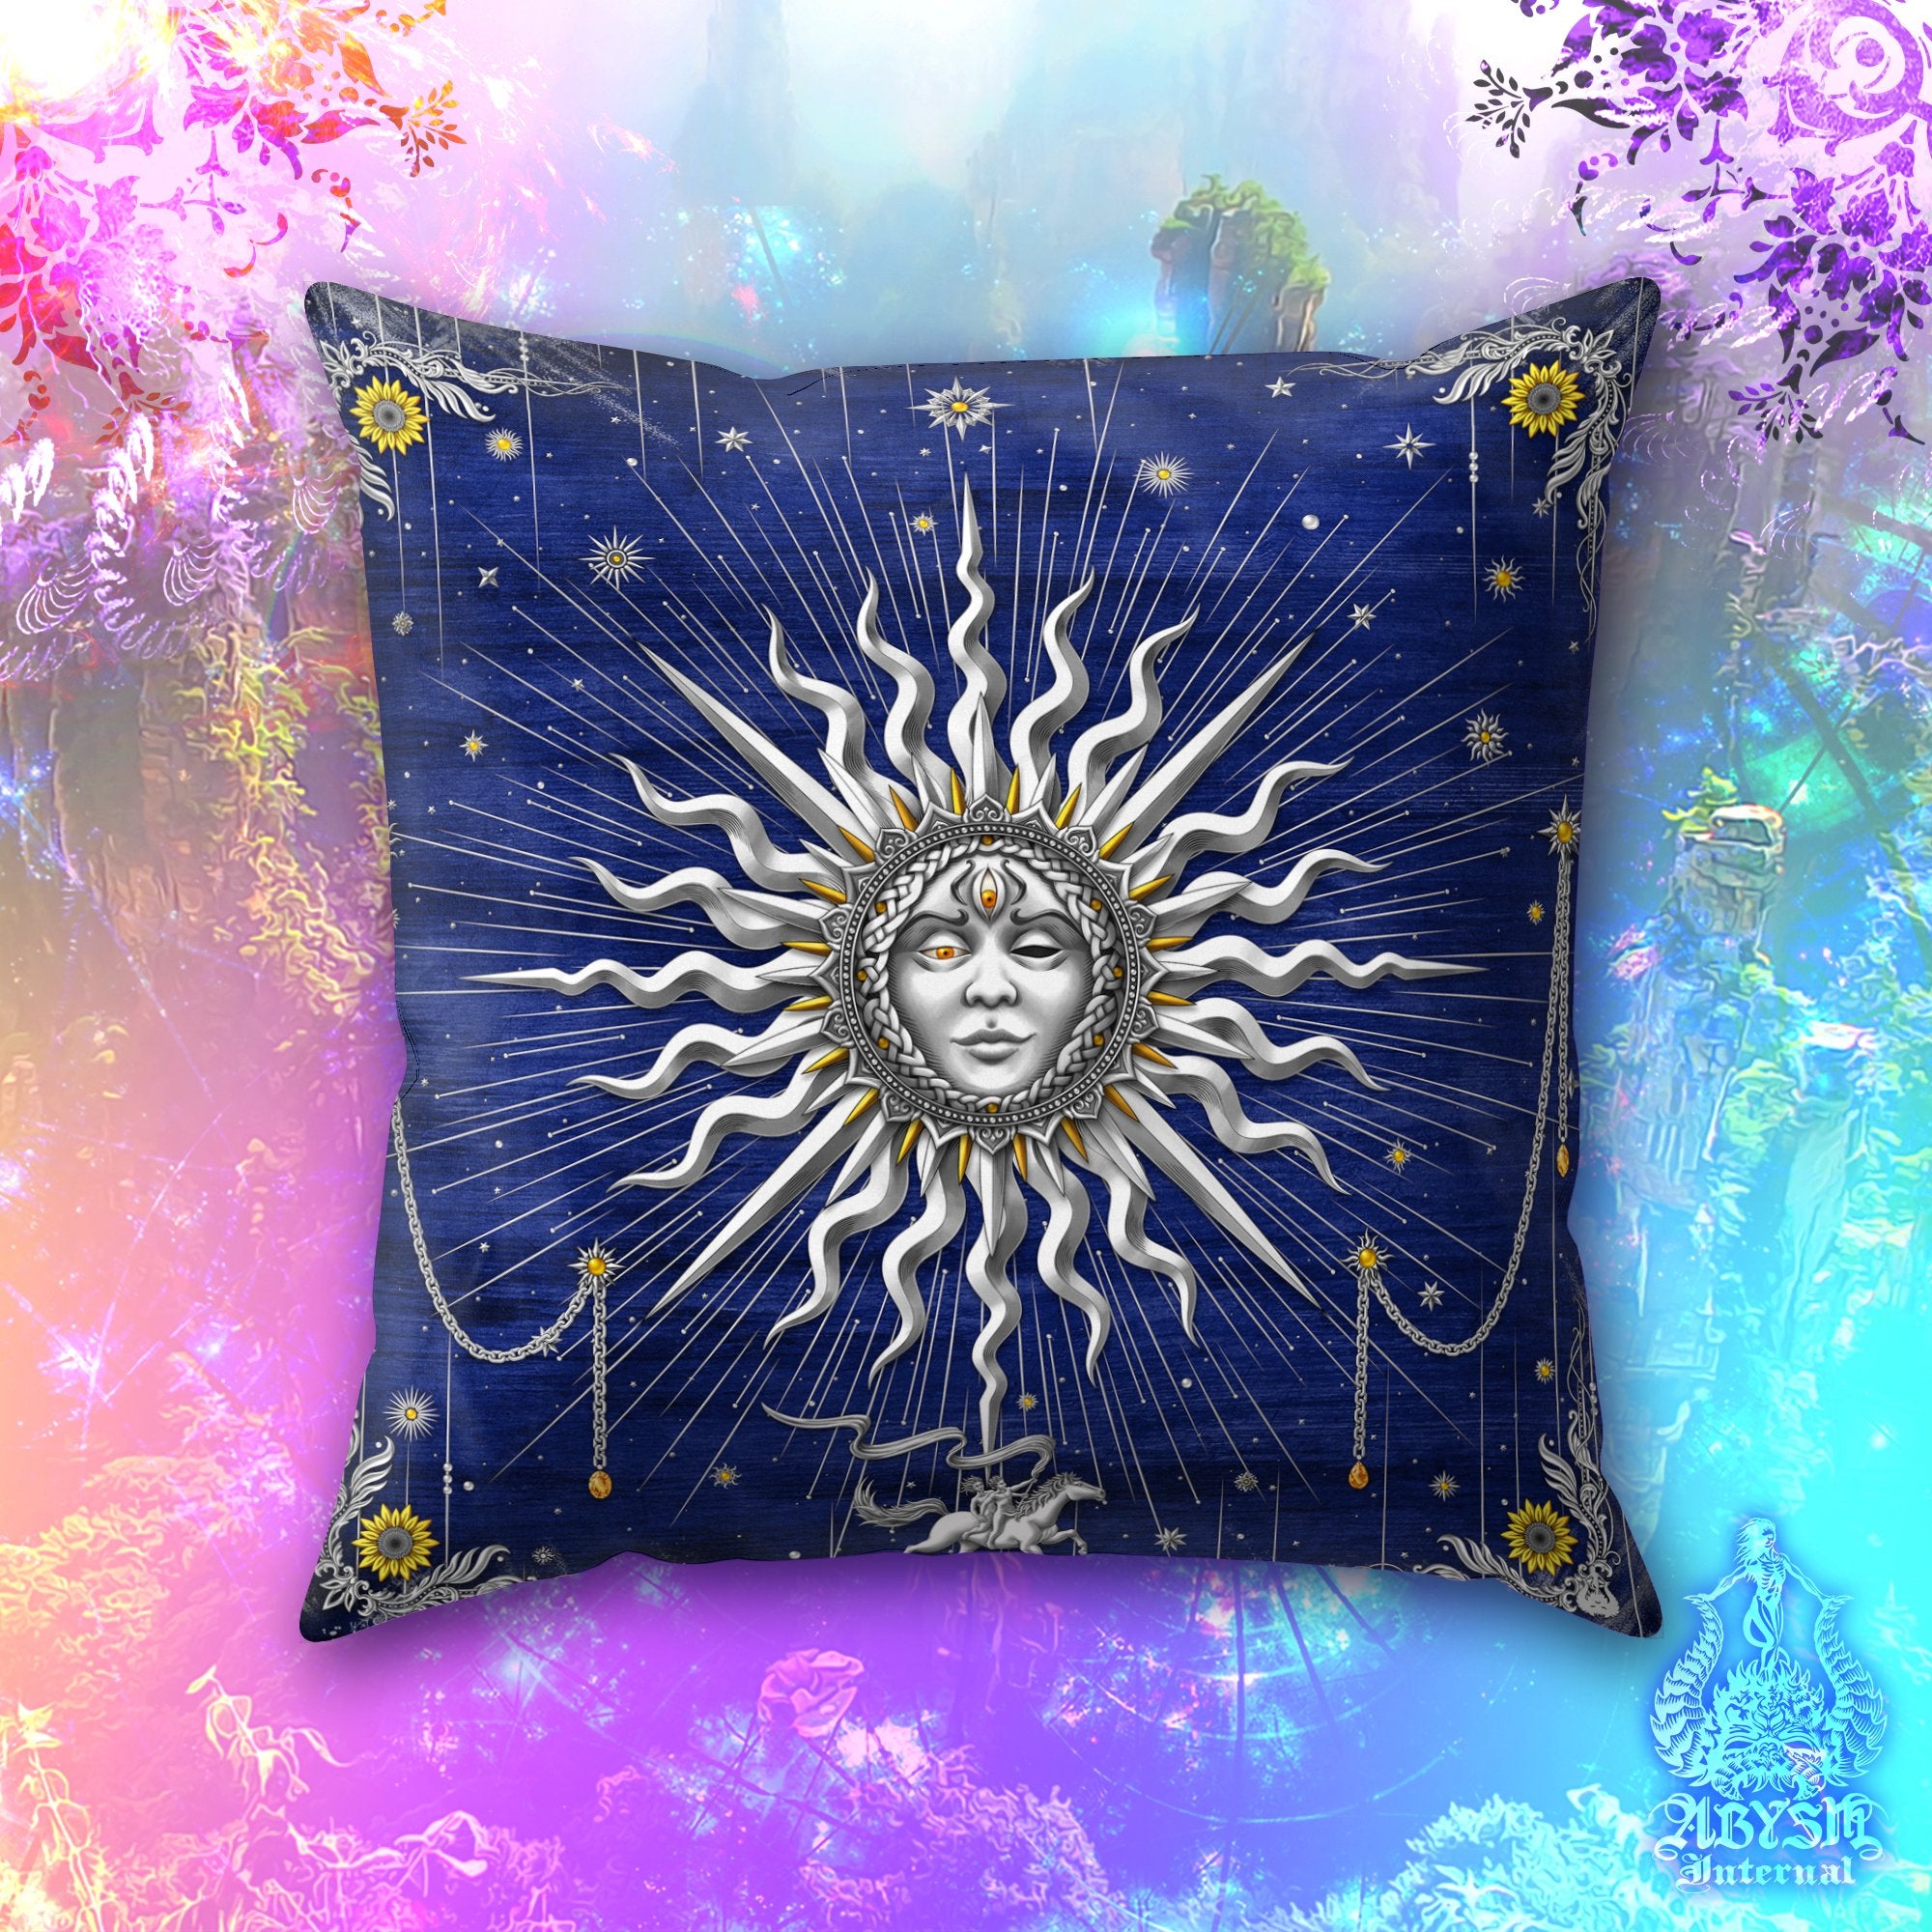 Silver Sun Throw Pillow, Boho Decorative Accent Pillow, Square Cushion Cover, Arcana Tarot Art, Indie Home, Magic & Fortune Room Decor - 7 Colors - Abysm Internal